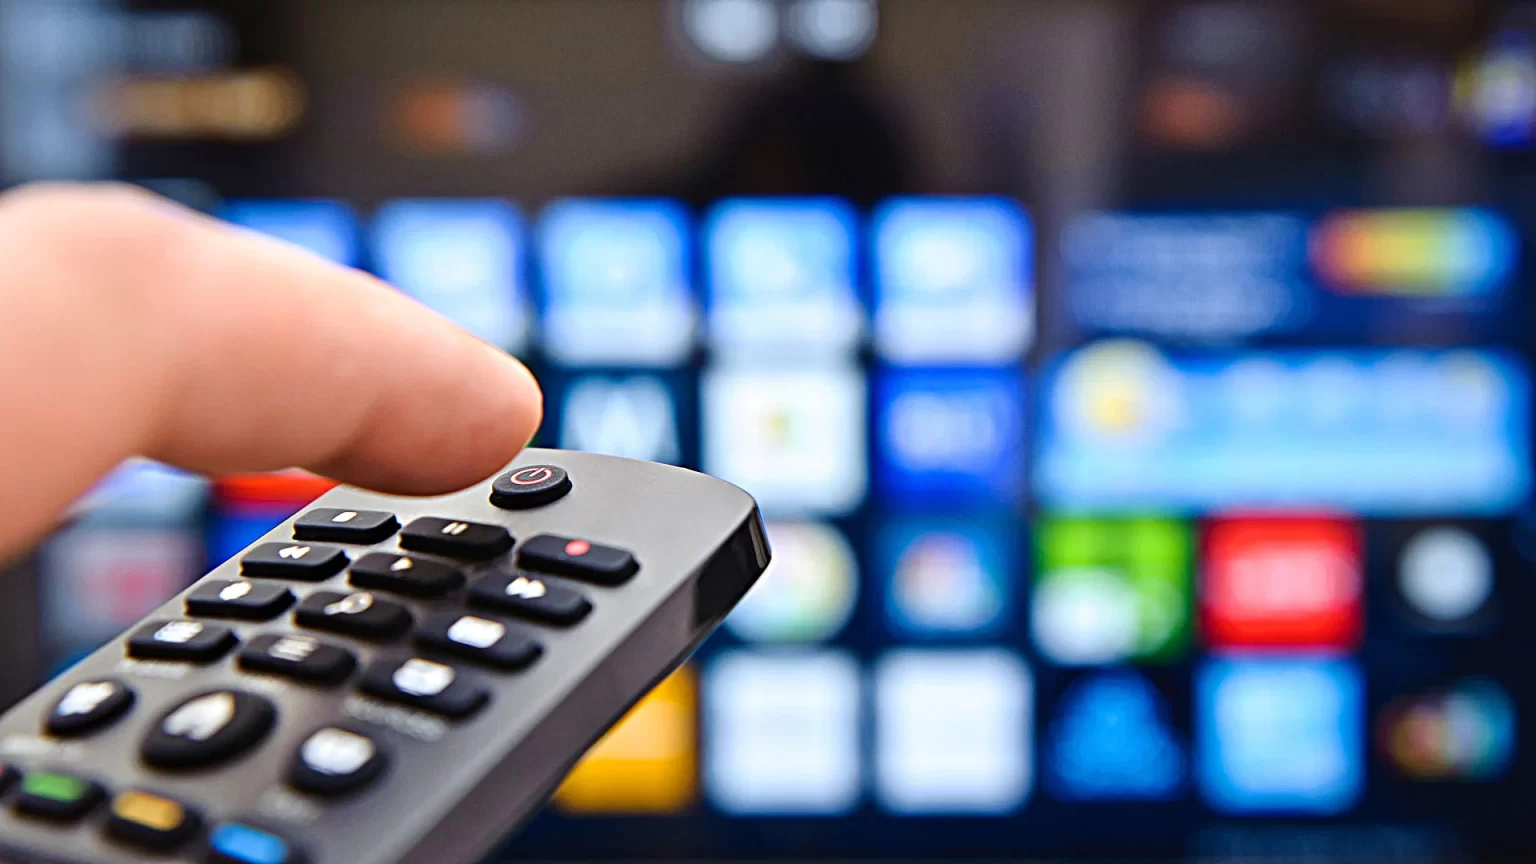 digital TV July 1536x864 - Digital TV market to expand at 14% over forecast period